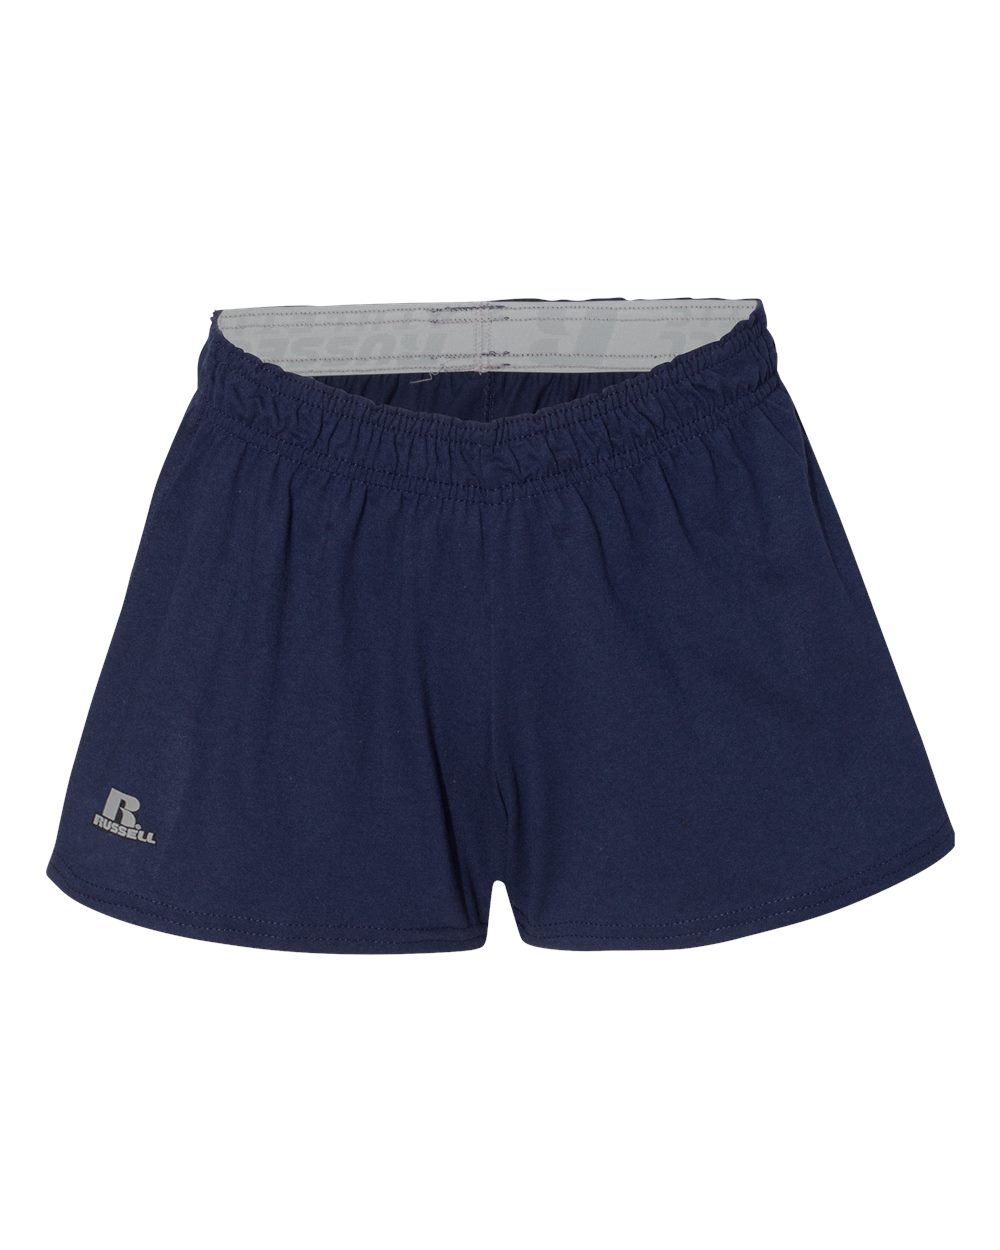 russell jersey shorts